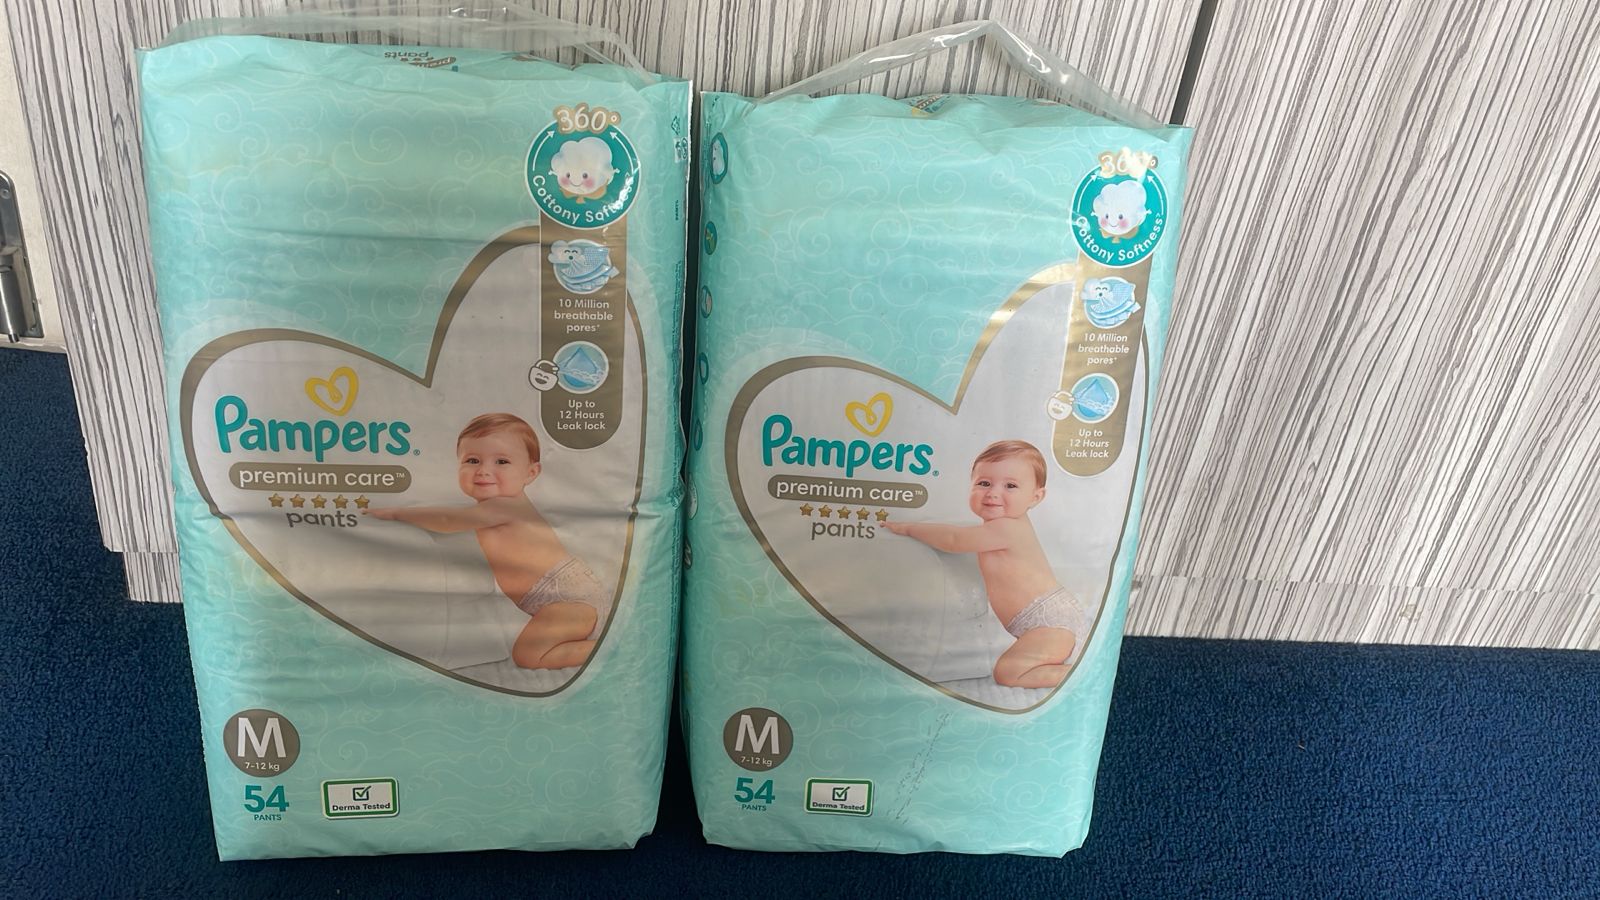 Pampers Premium Care Pants P Diaper with 40un - AliExpress